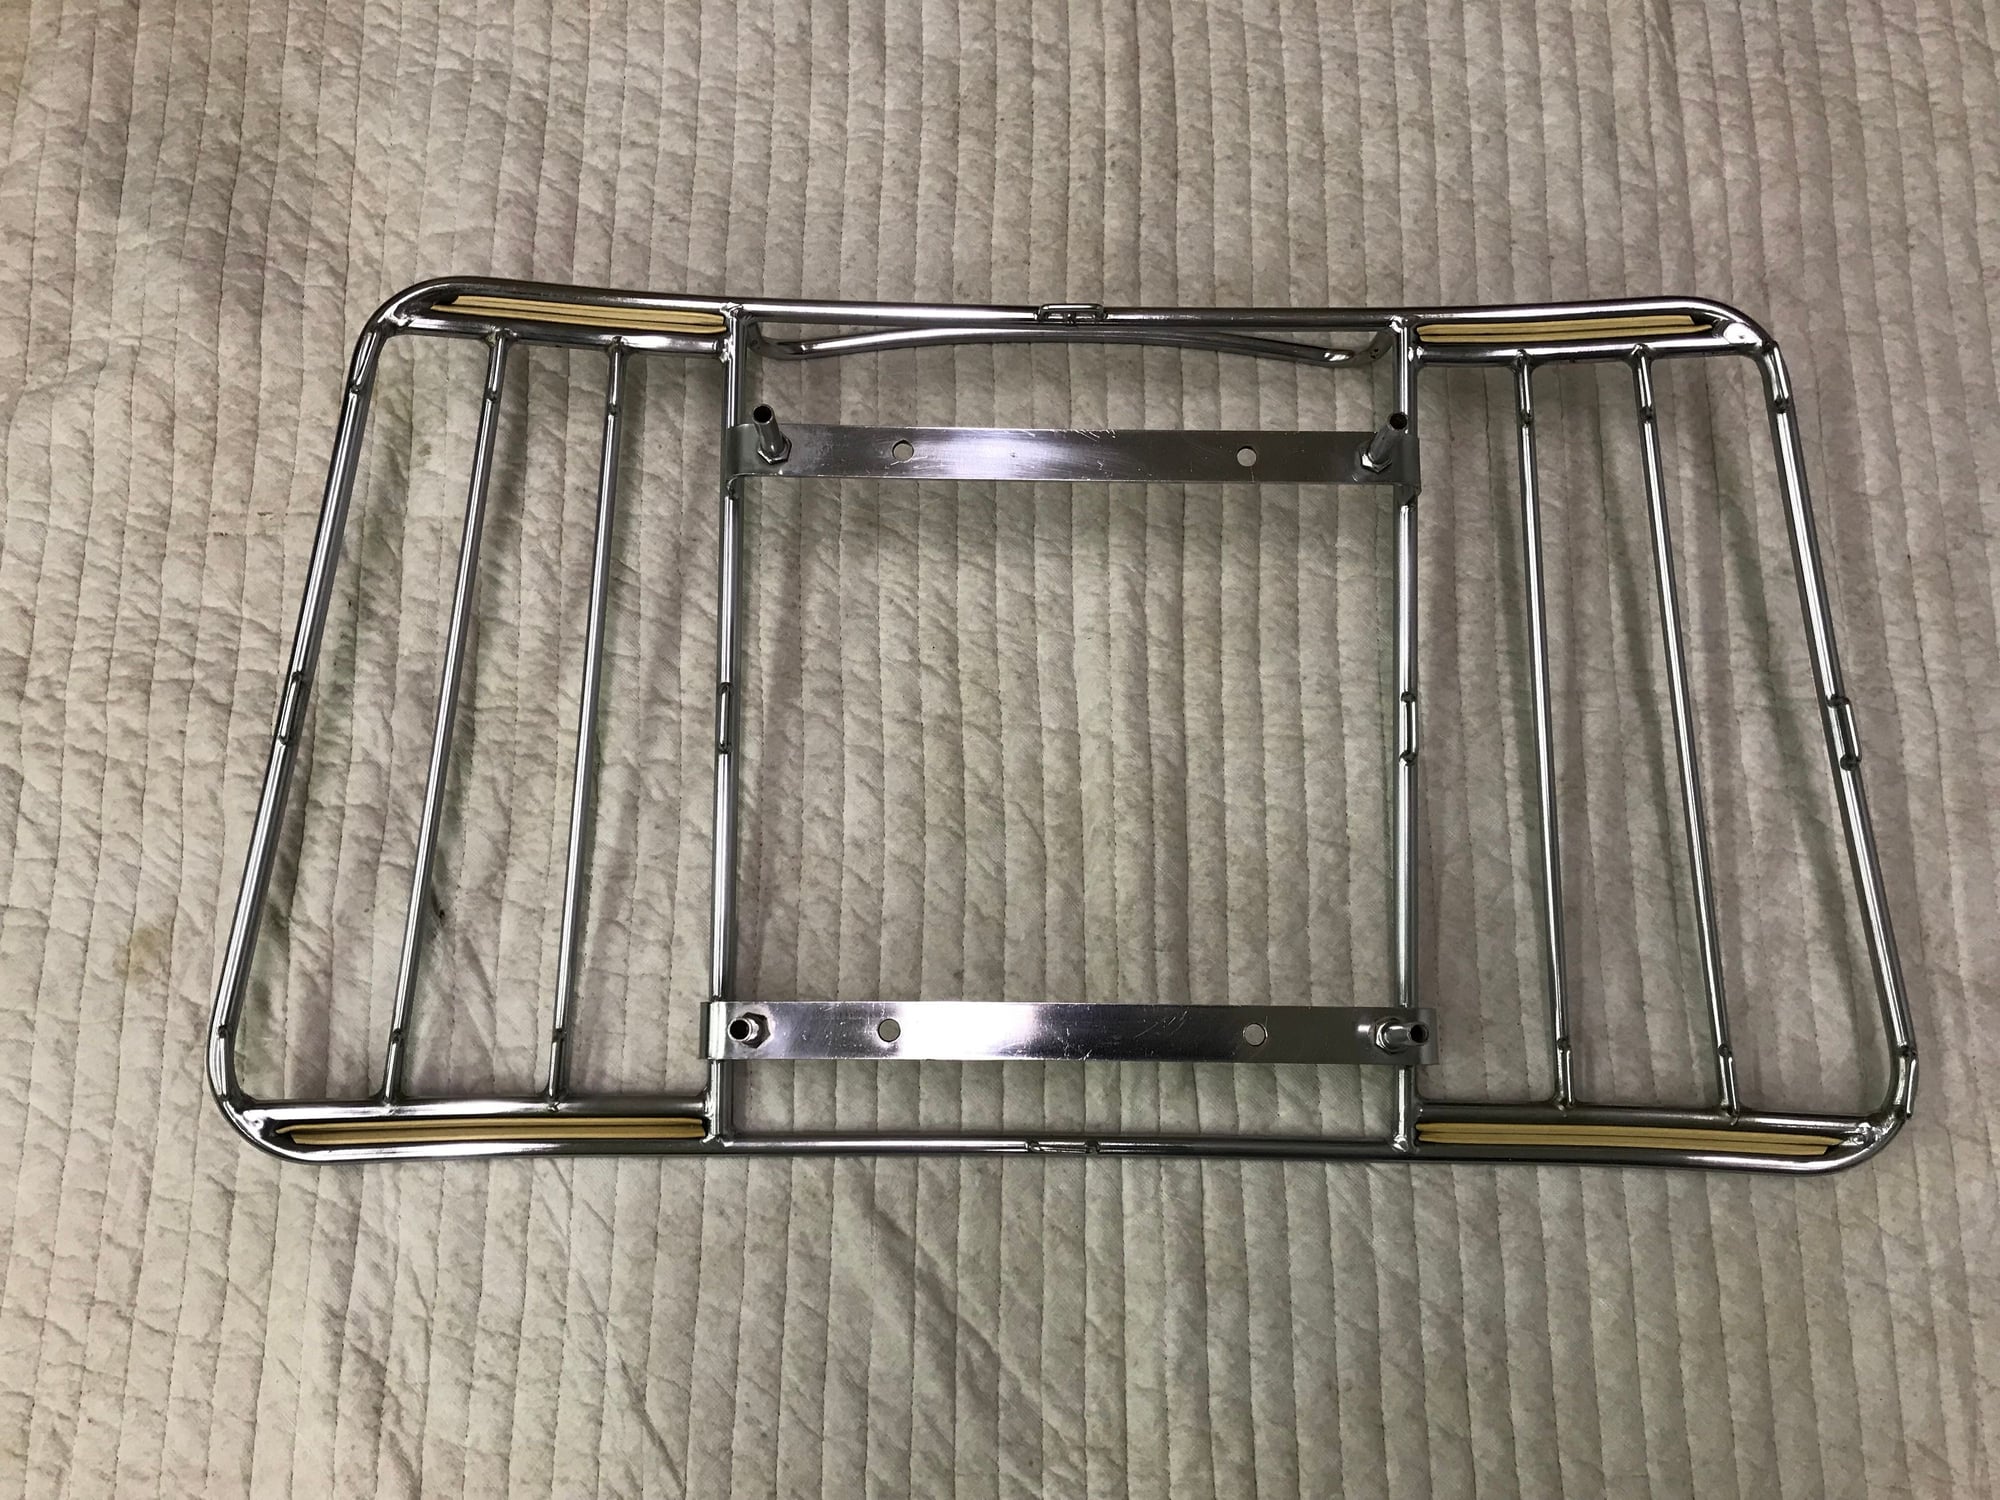 Accessories - Leitz luggage rack - Used - 1955 to 1965 Porsche 356 - Naperville, IL 60565, United States